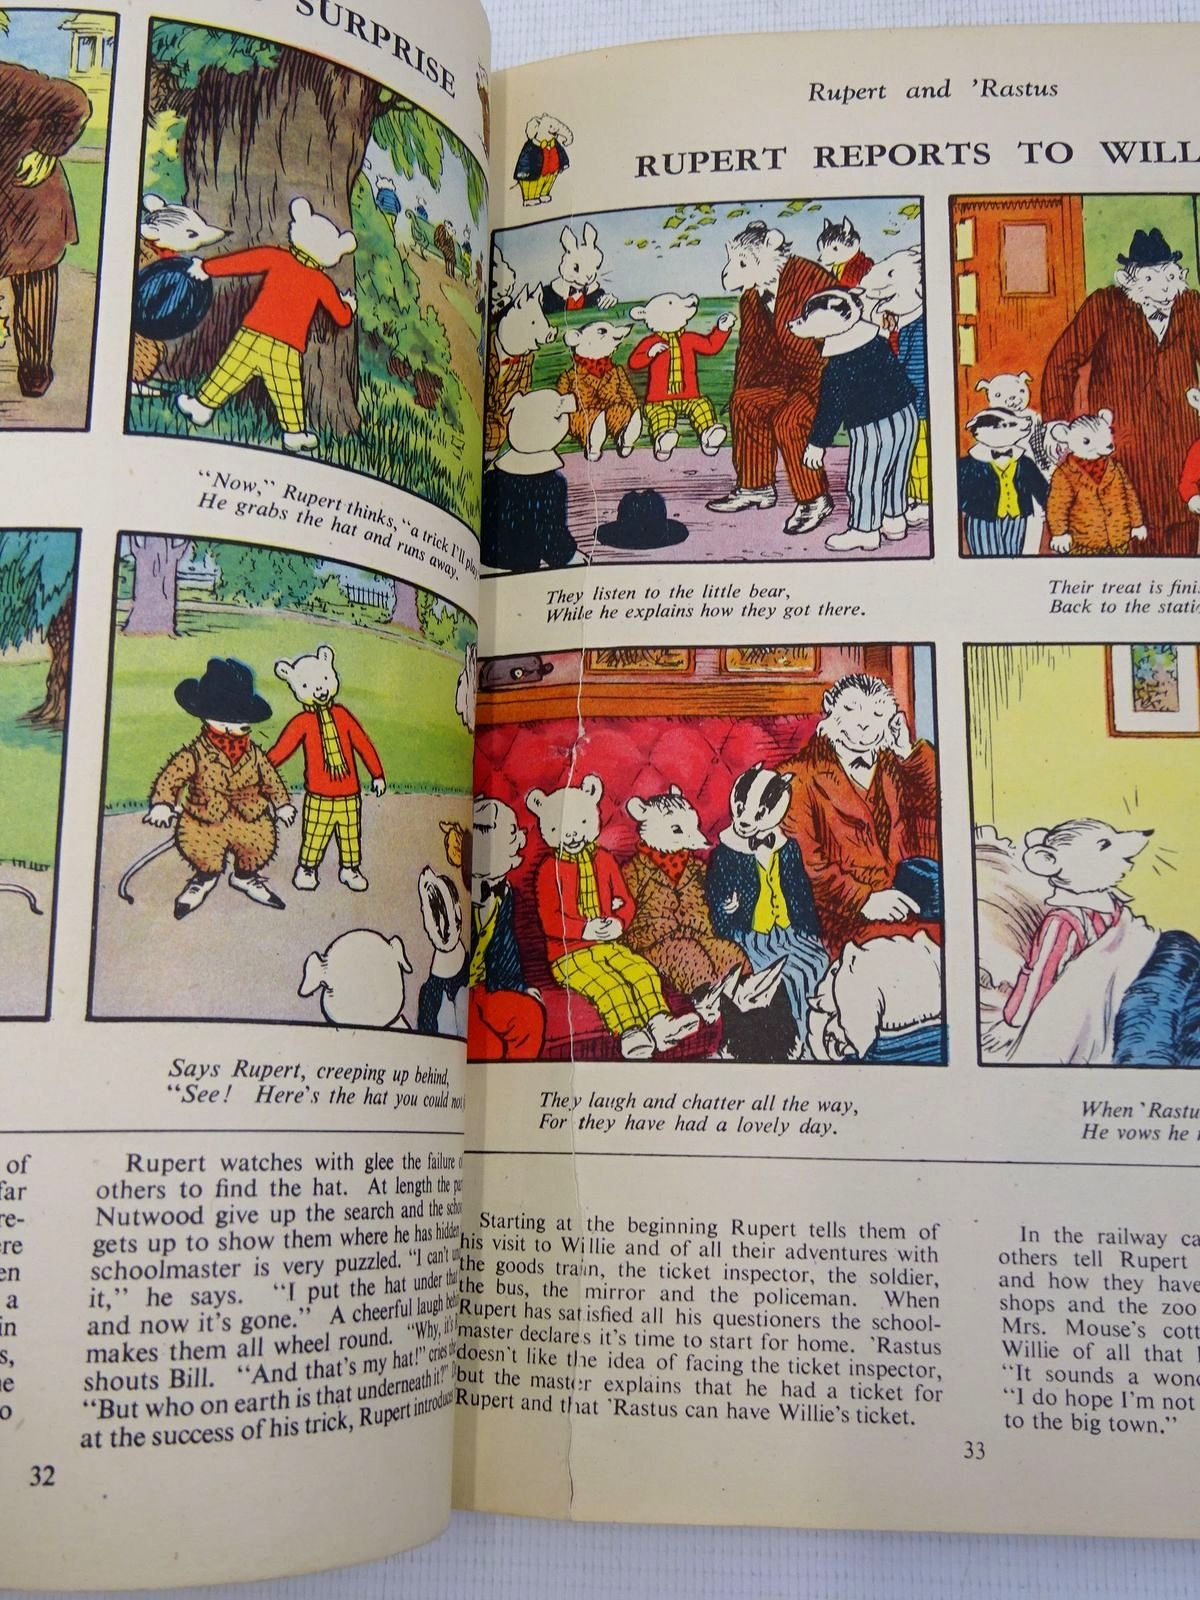 Photo of RUPERT ANNUAL 1946 - THE NEW RUPERT BOOK written by Bestall, Alfred illustrated by Bestall, Alfred published by Daily Express (STOCK CODE: 1817300)  for sale by Stella & Rose's Books